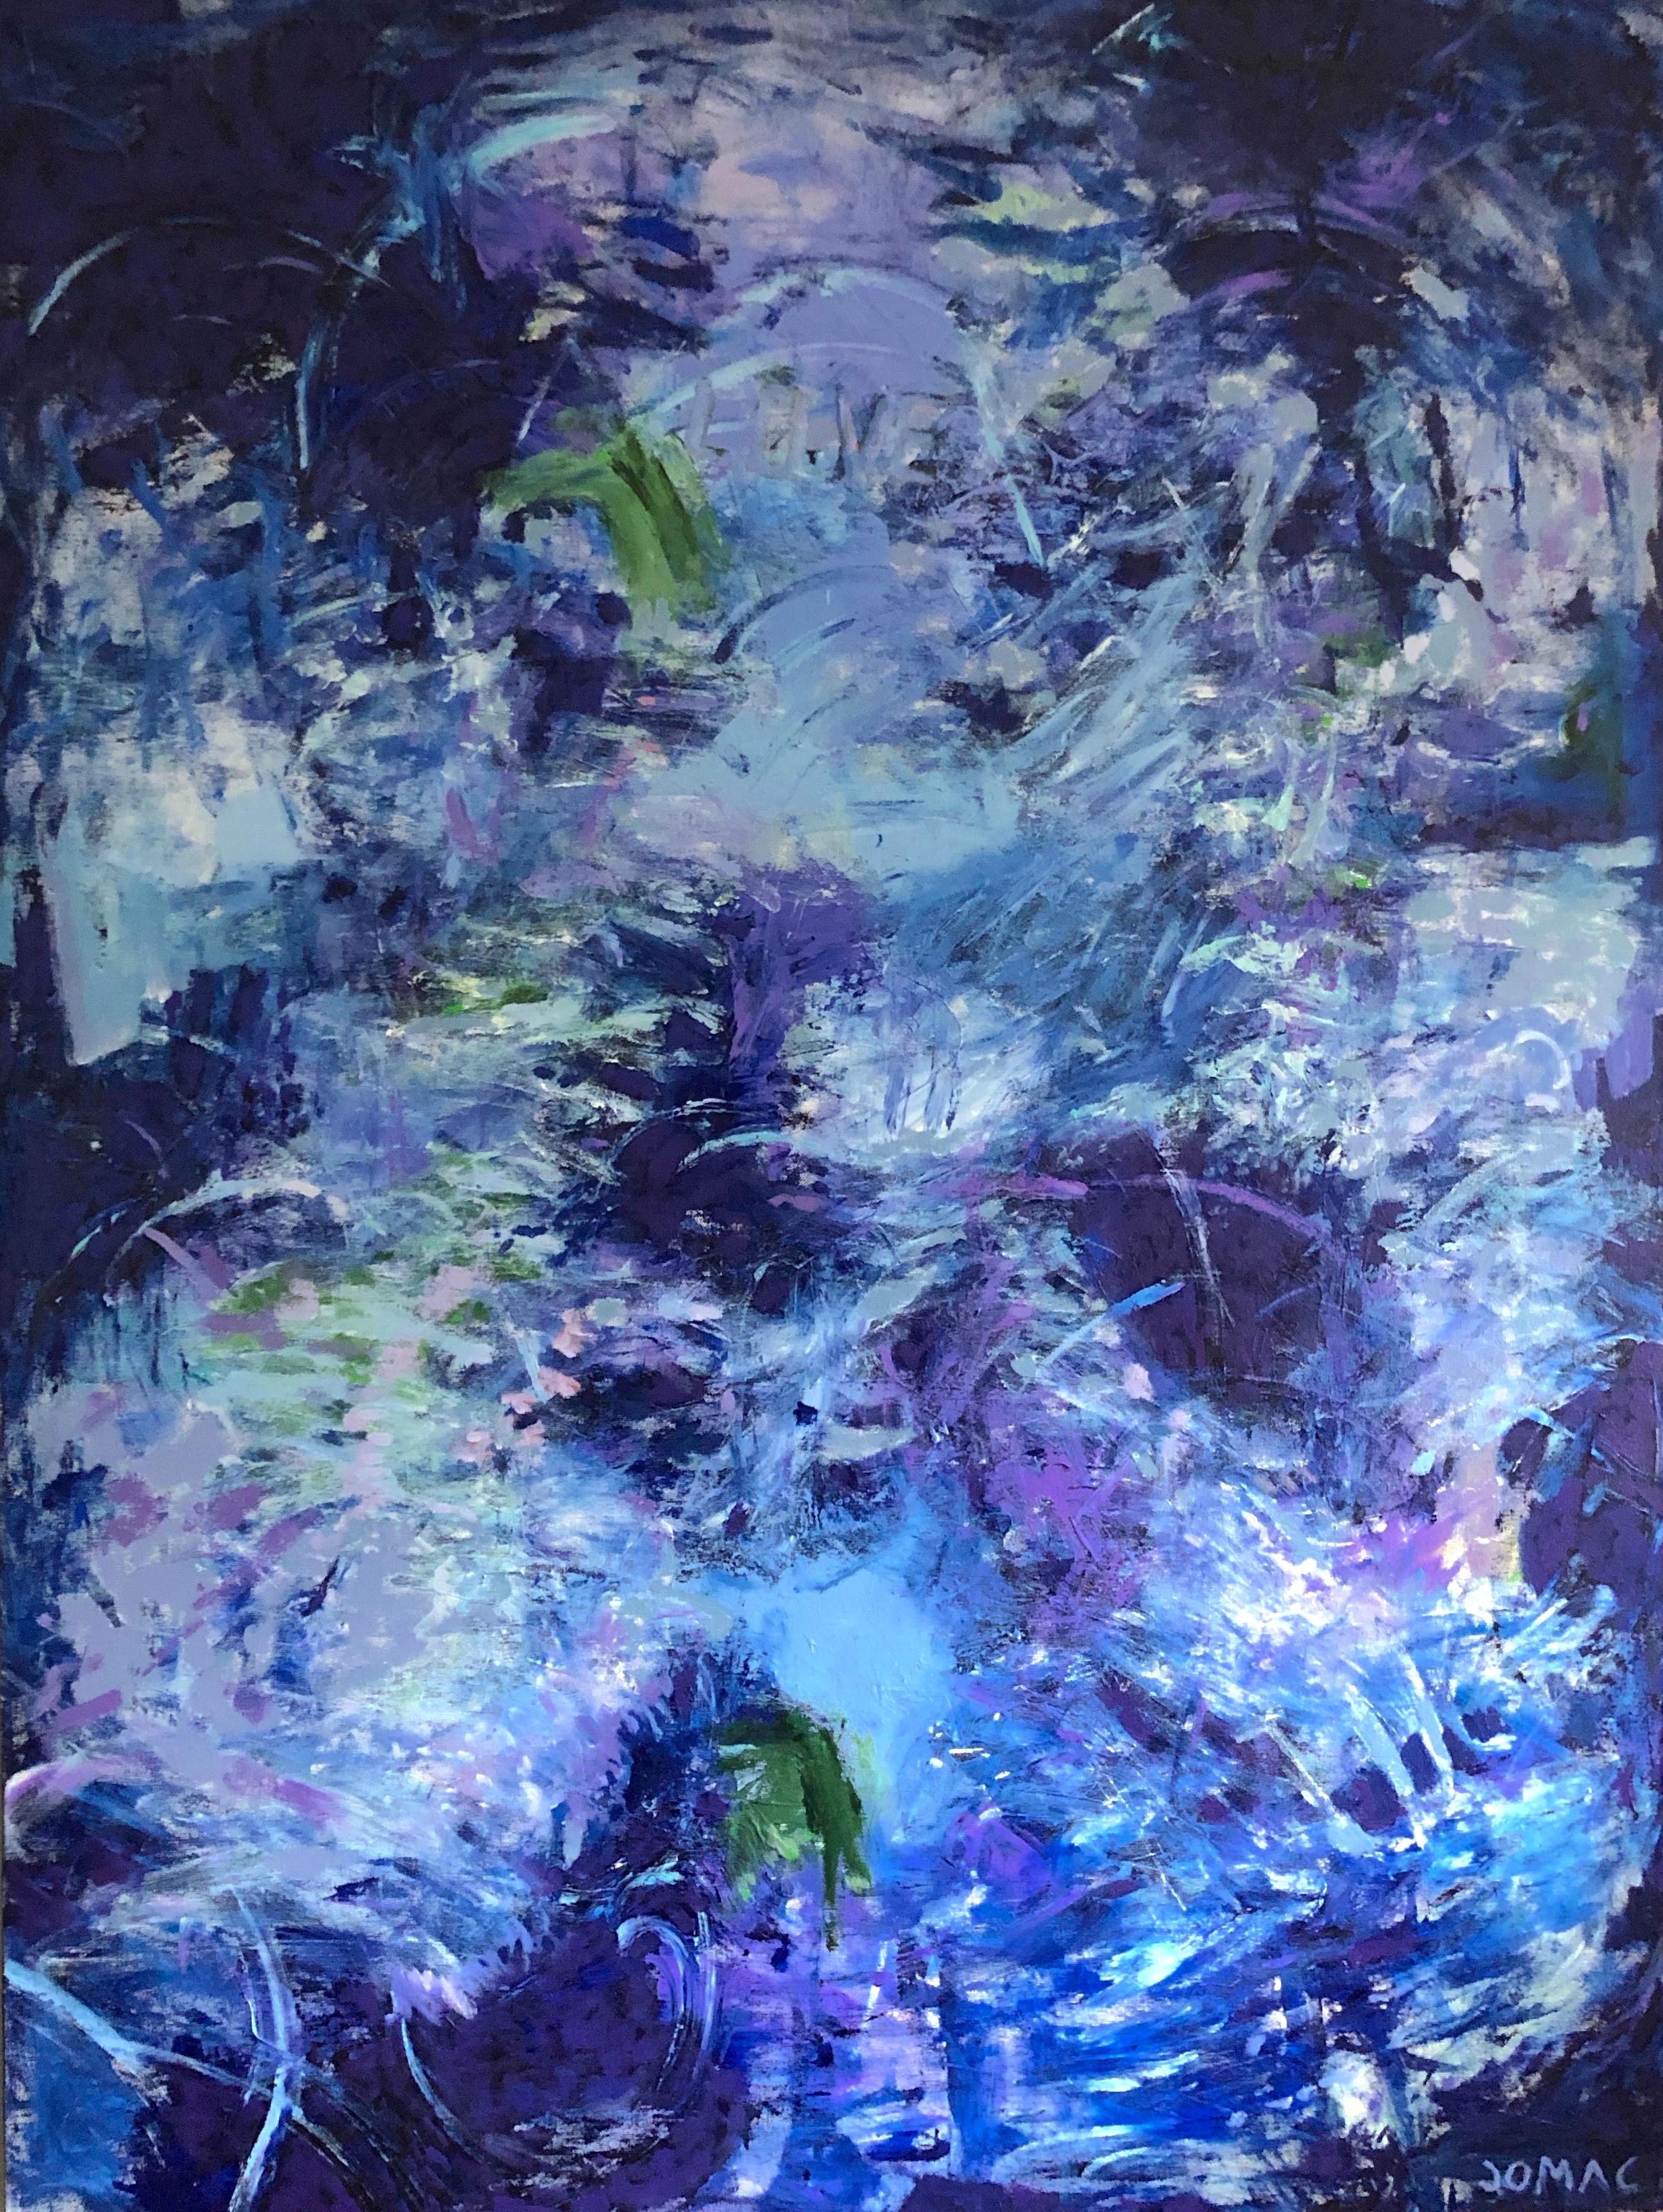 Joseph McAleer Abstract Painting - Kind of Blue: contemporary abstract AbEx painting in dark blues w/ purple, green